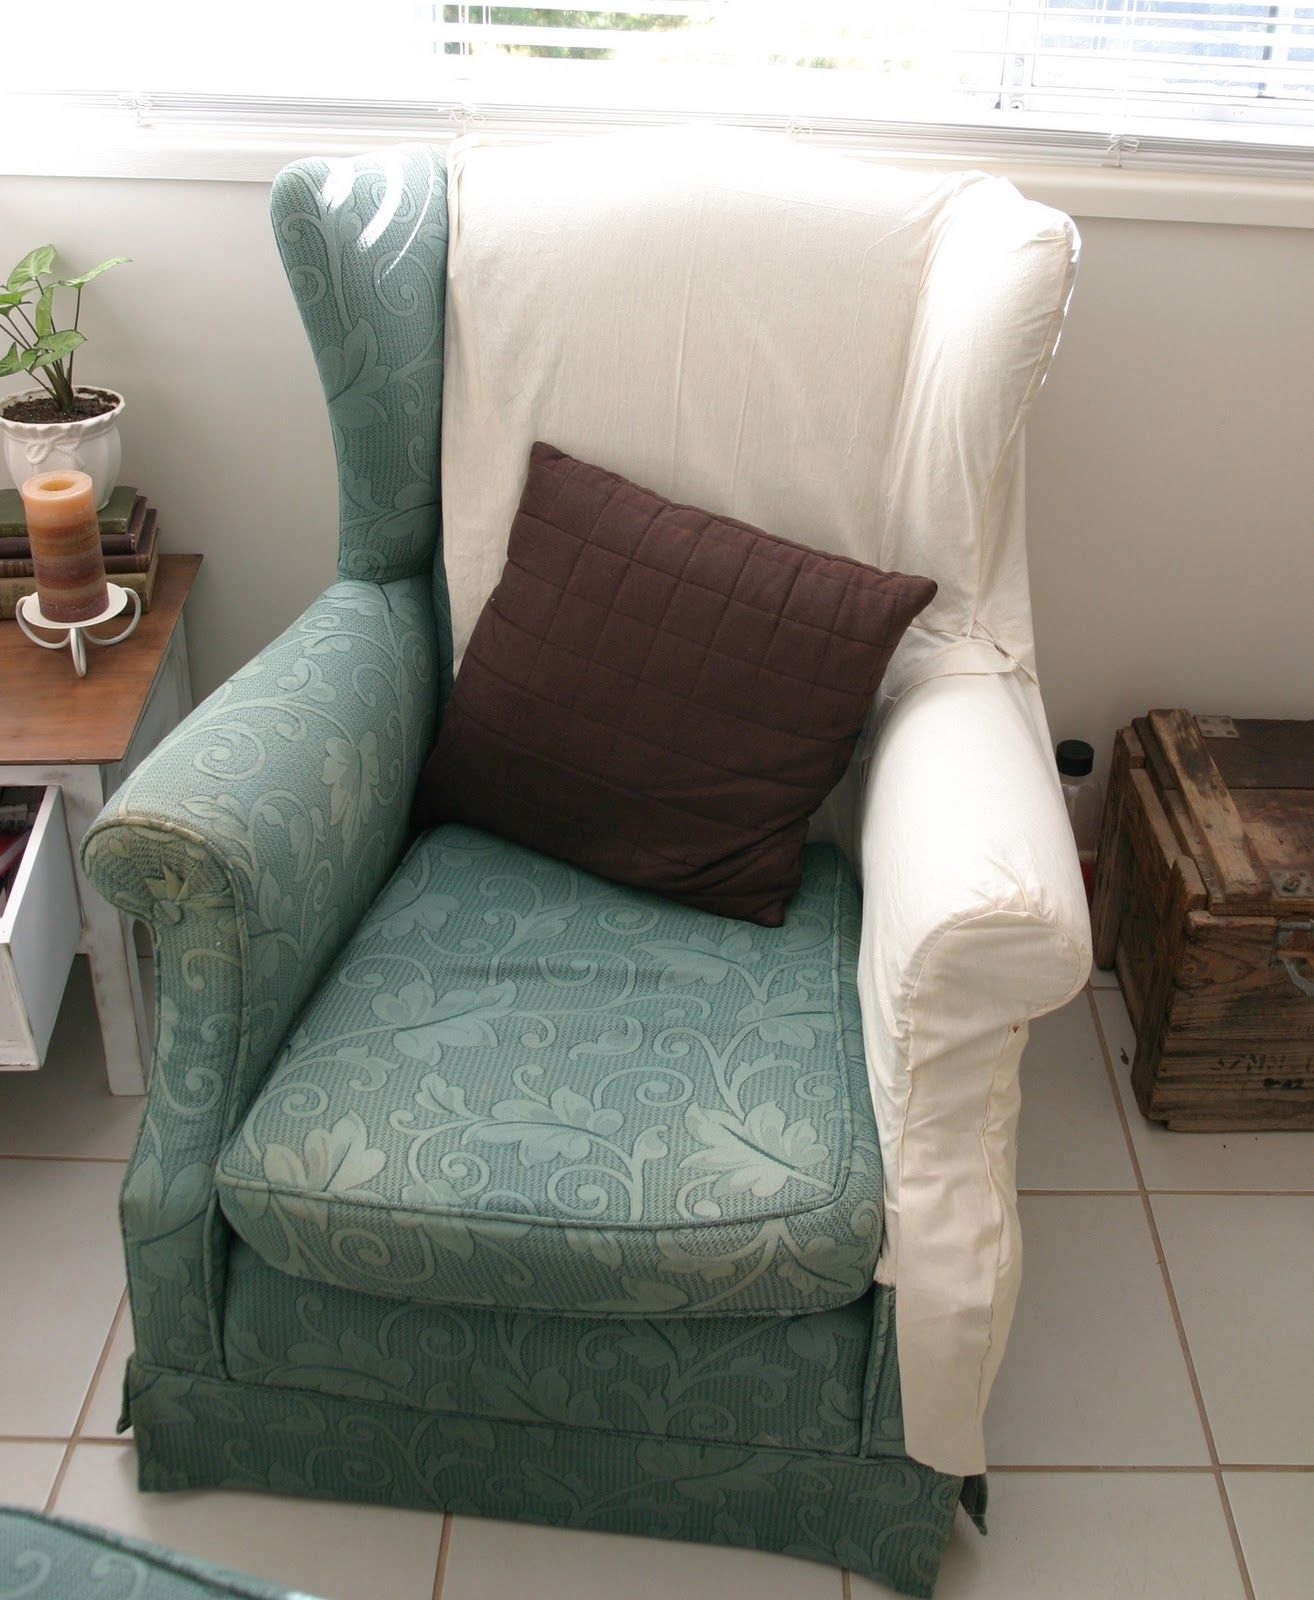 The Whimsical Wife Wingback Chair Slipcovers At Long Last Regarding Slipcovers For Chairs And Sofas (View 15 of 15)